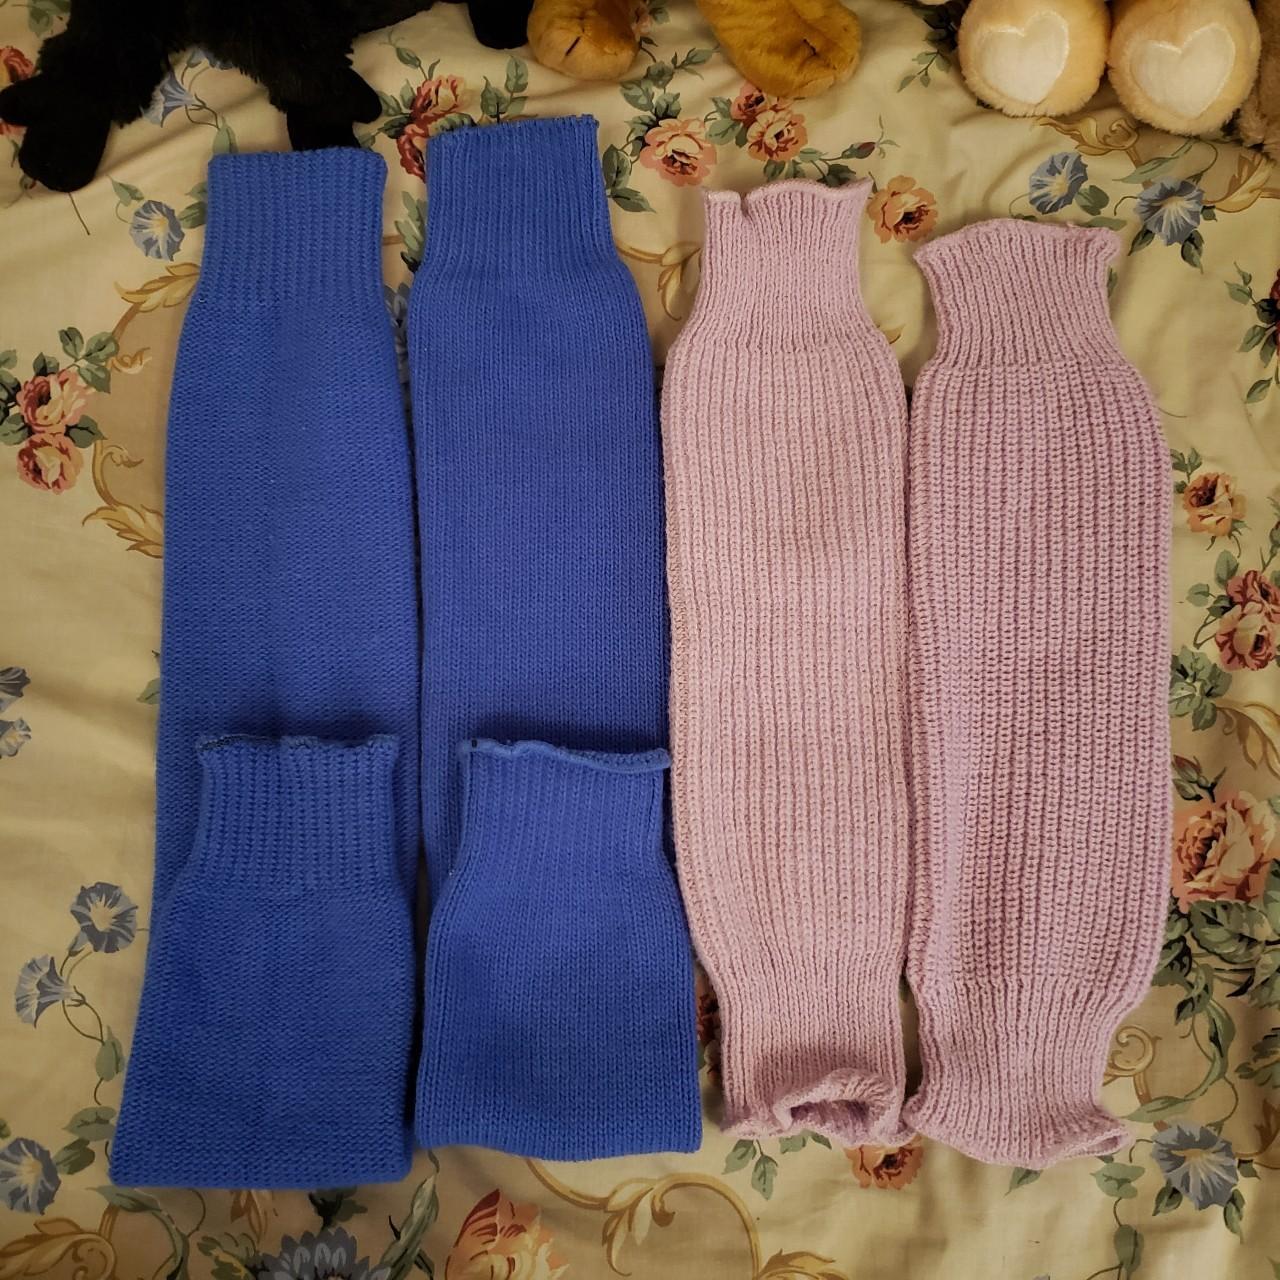 Vintage 80s Two Pairs of Leg Warmers blue and light - Depop